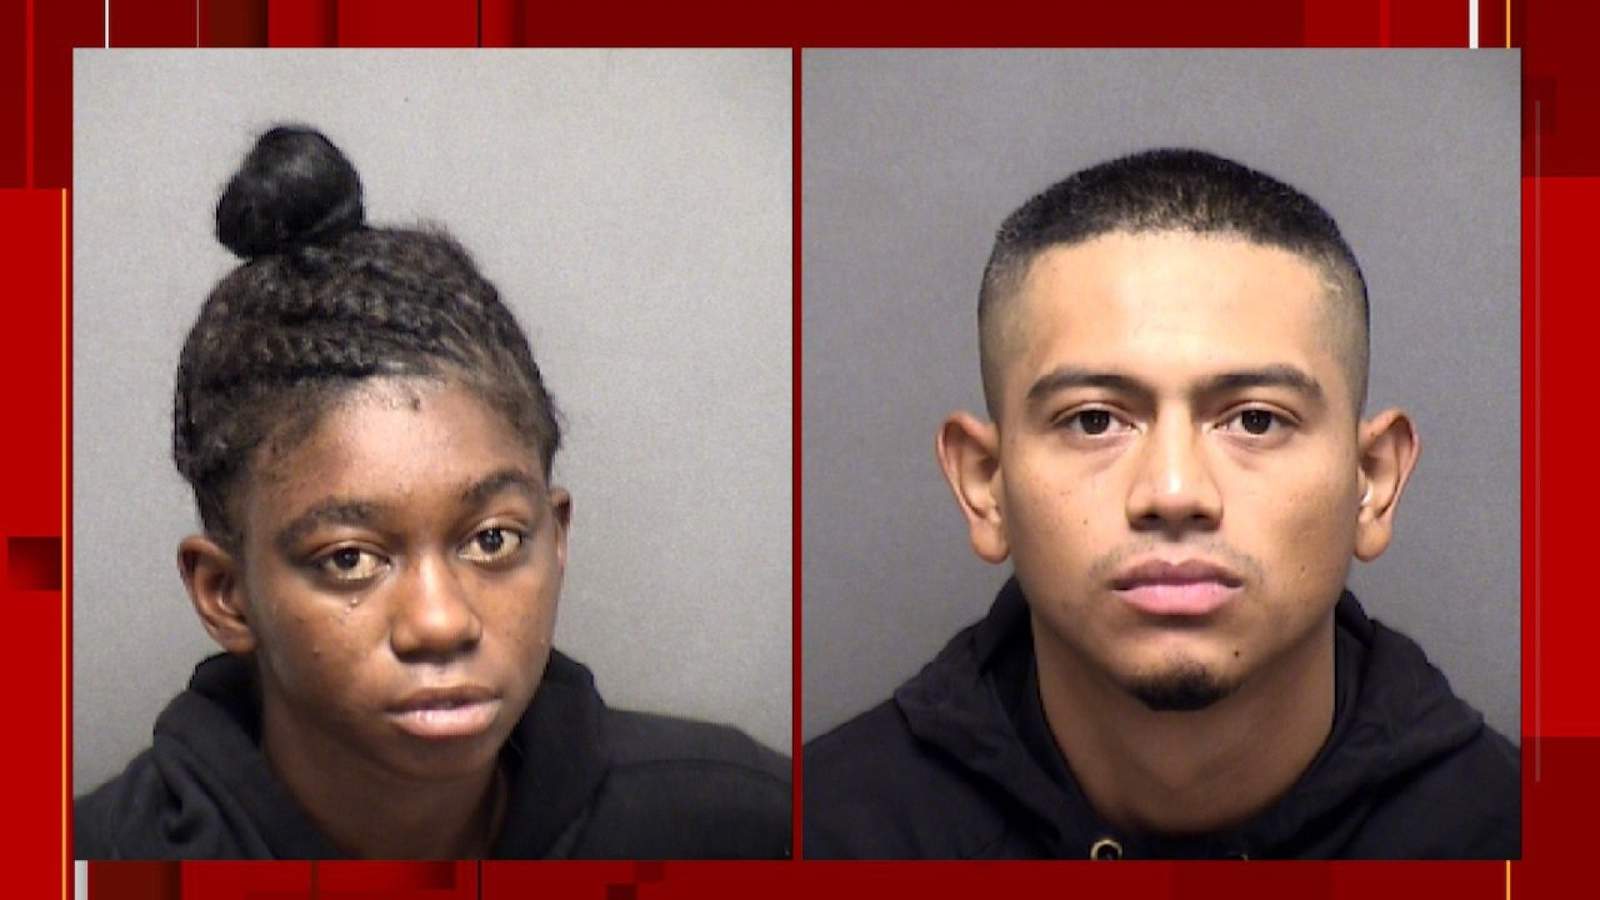 Suspects charged in slaying of woman over cellphone also accused of robbing, assaulting man days earlier